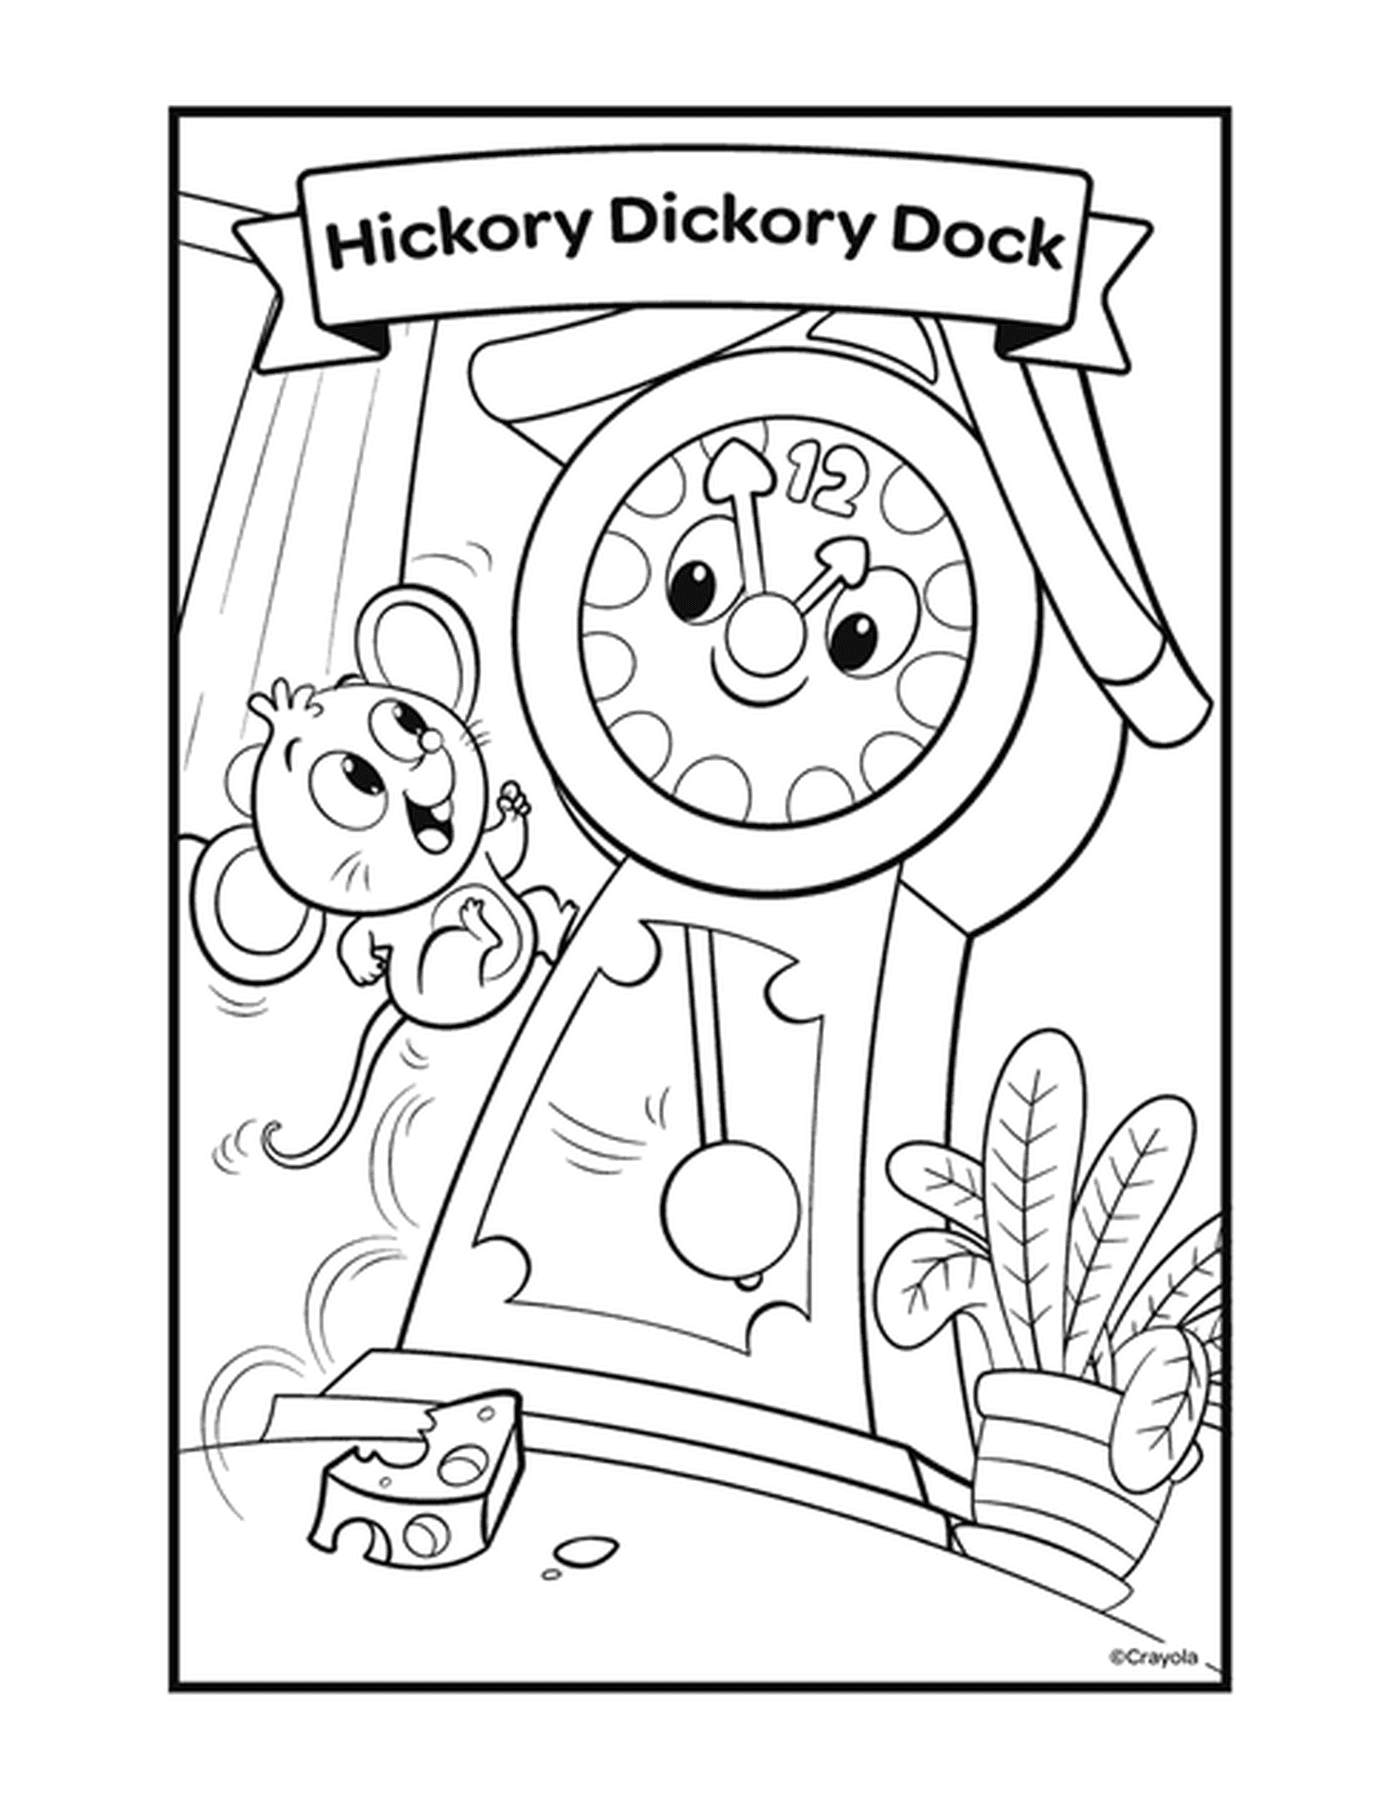  The Hickory Dickory Dock with a clock and a mouse 